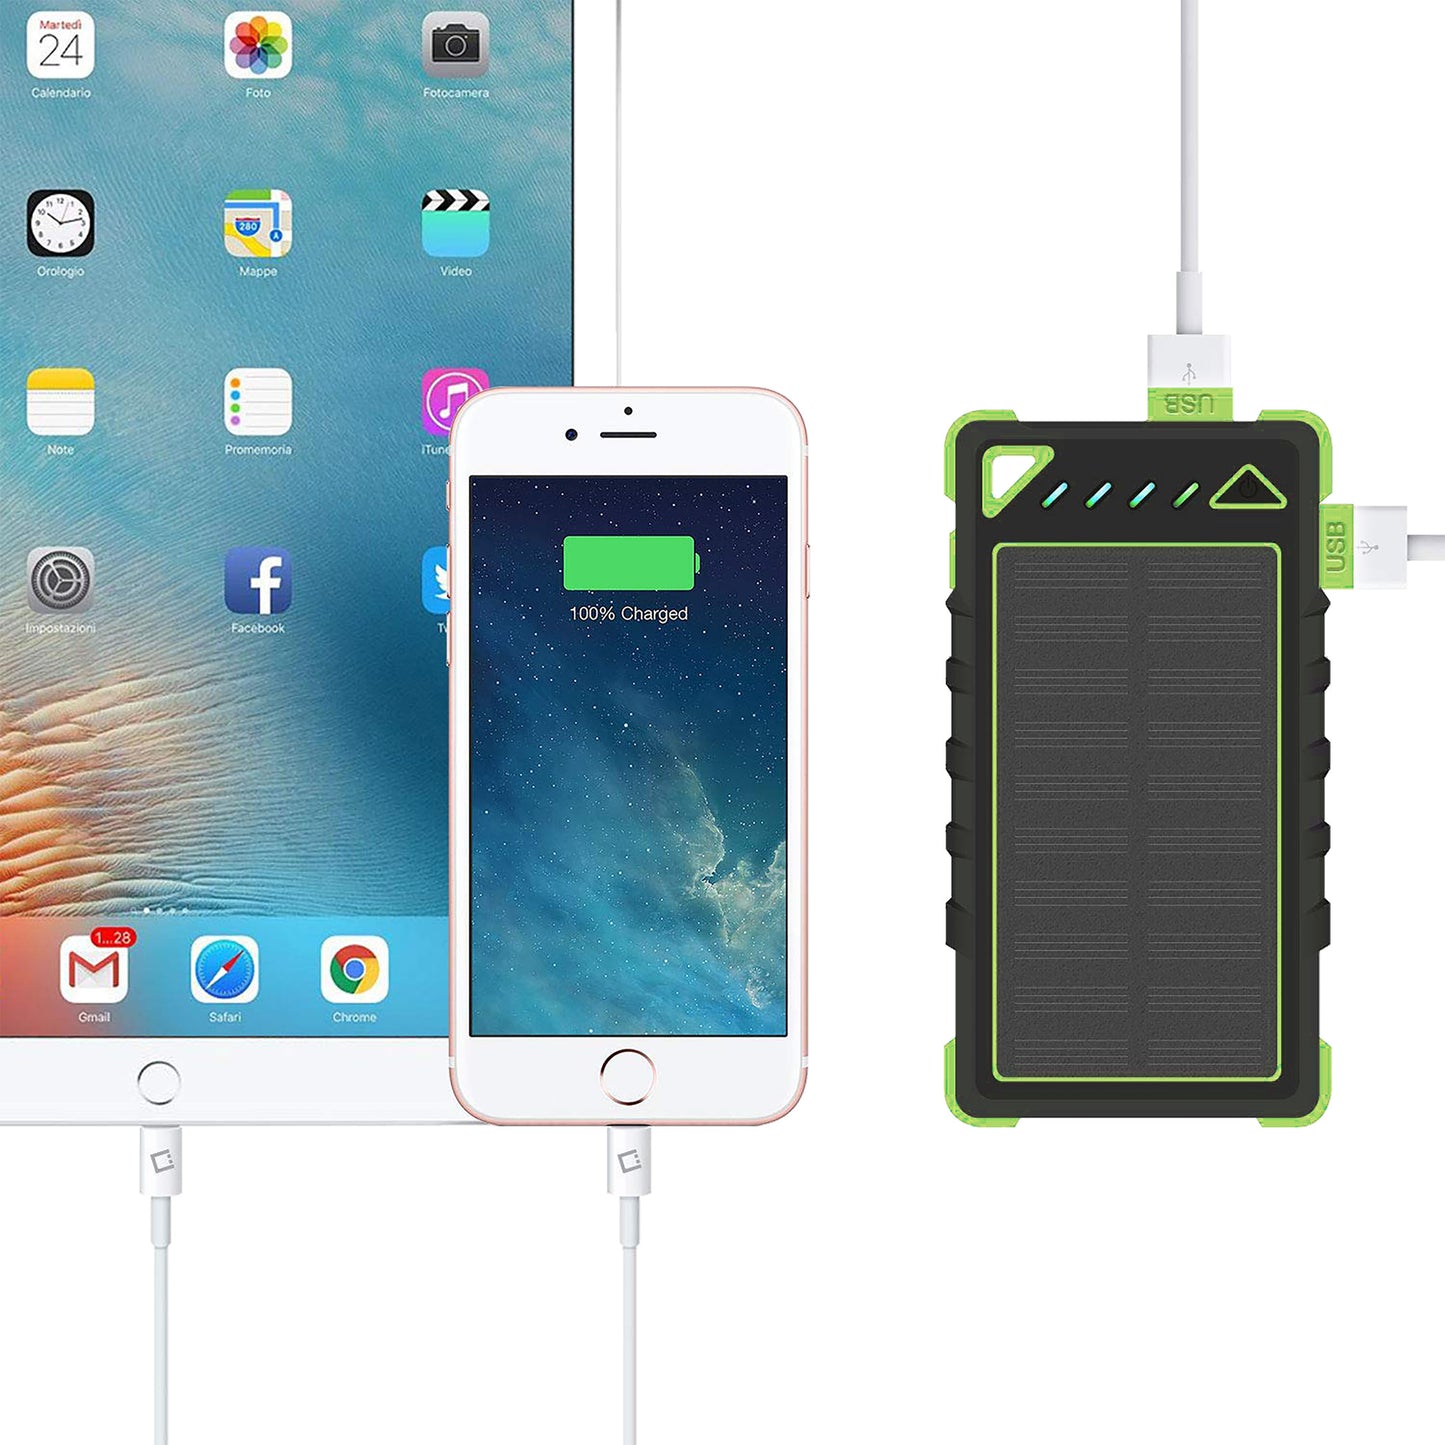 Smartphone Charger with 5 Watt LED Light (Refurbished)